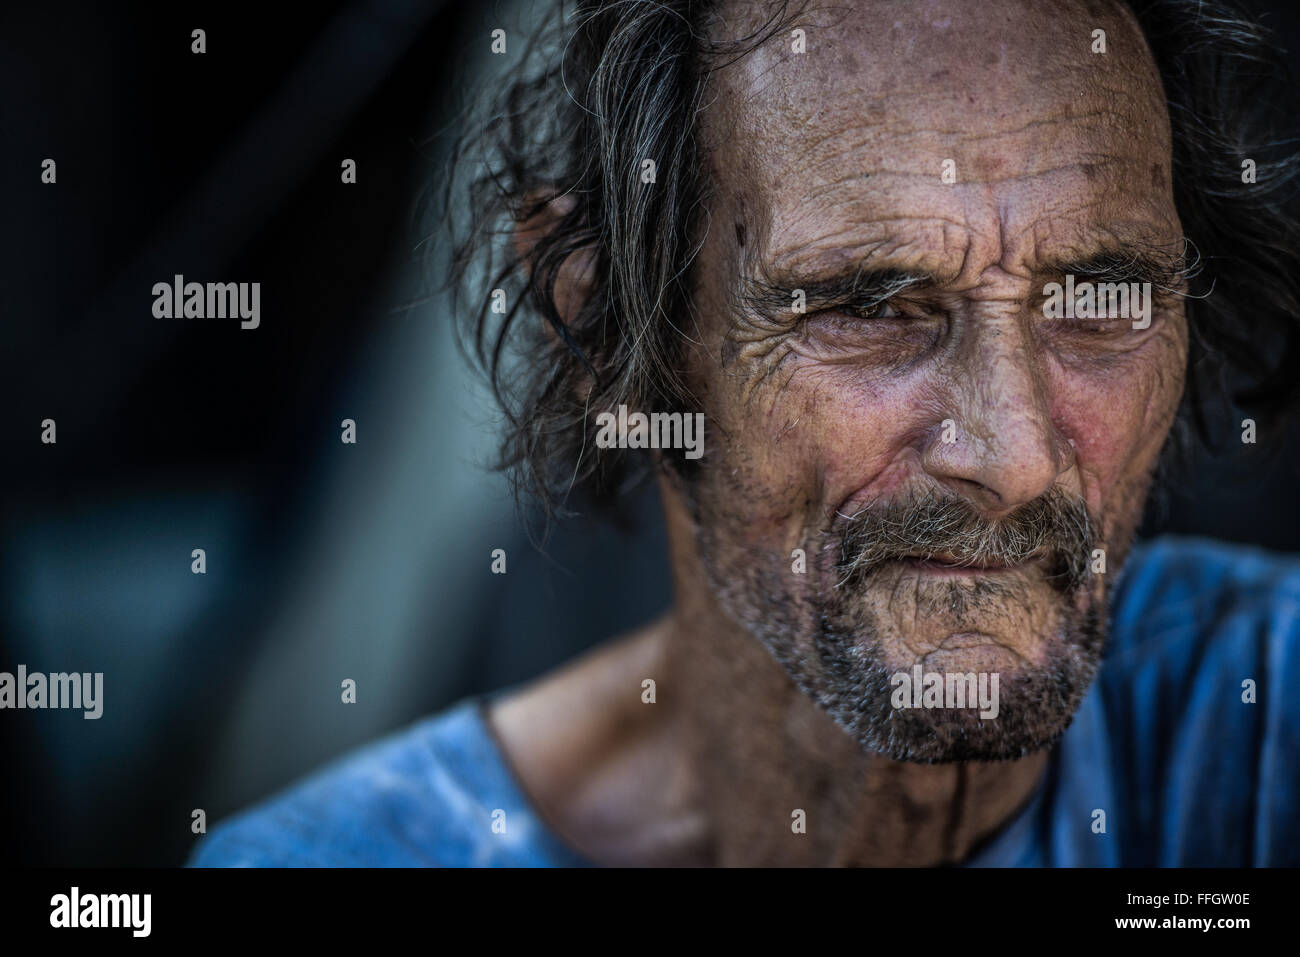 Kirk Miller, 70, lives under a bridge in El Monte, California. He's been homeless for more than a year. Although Vet Hunters search for veterans to assist, they also try to help the community and and help other homeless individuals, as well. Stock Photo